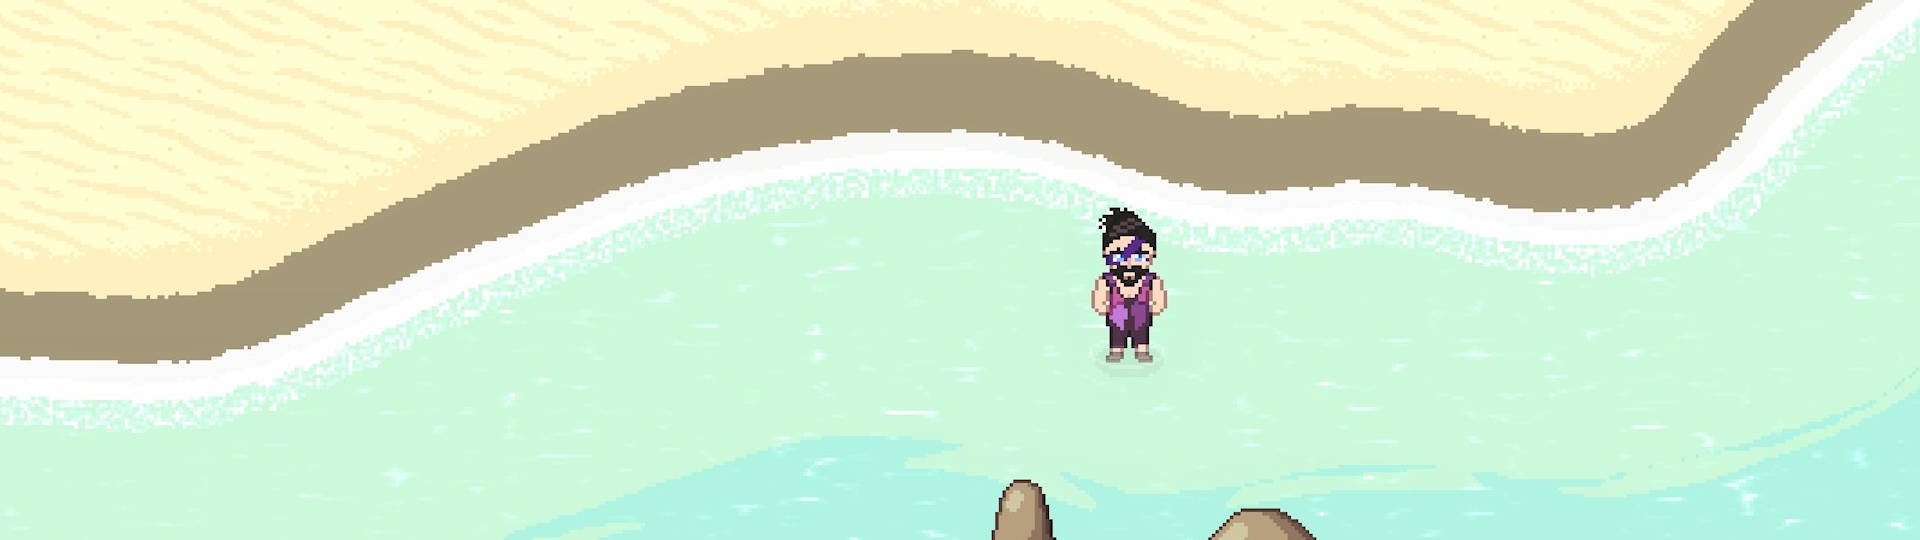 Roots of Pacha Fishing Guide - Fish List Player Character Standing by the Ocean Shore